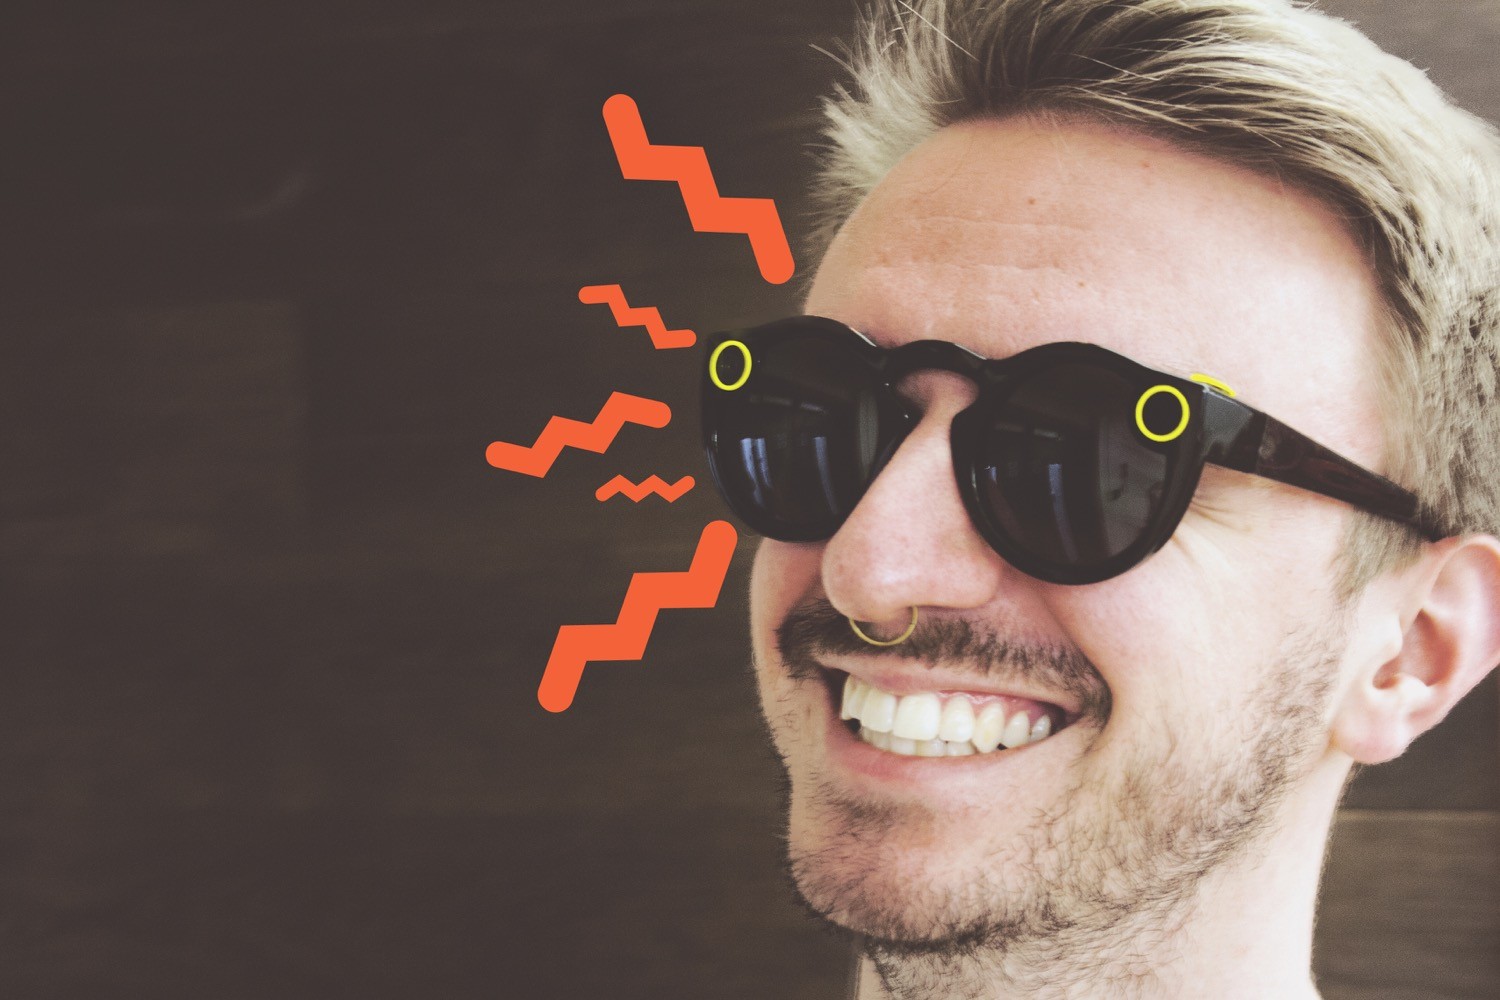 Snapchat Spectacles Glasses Presented